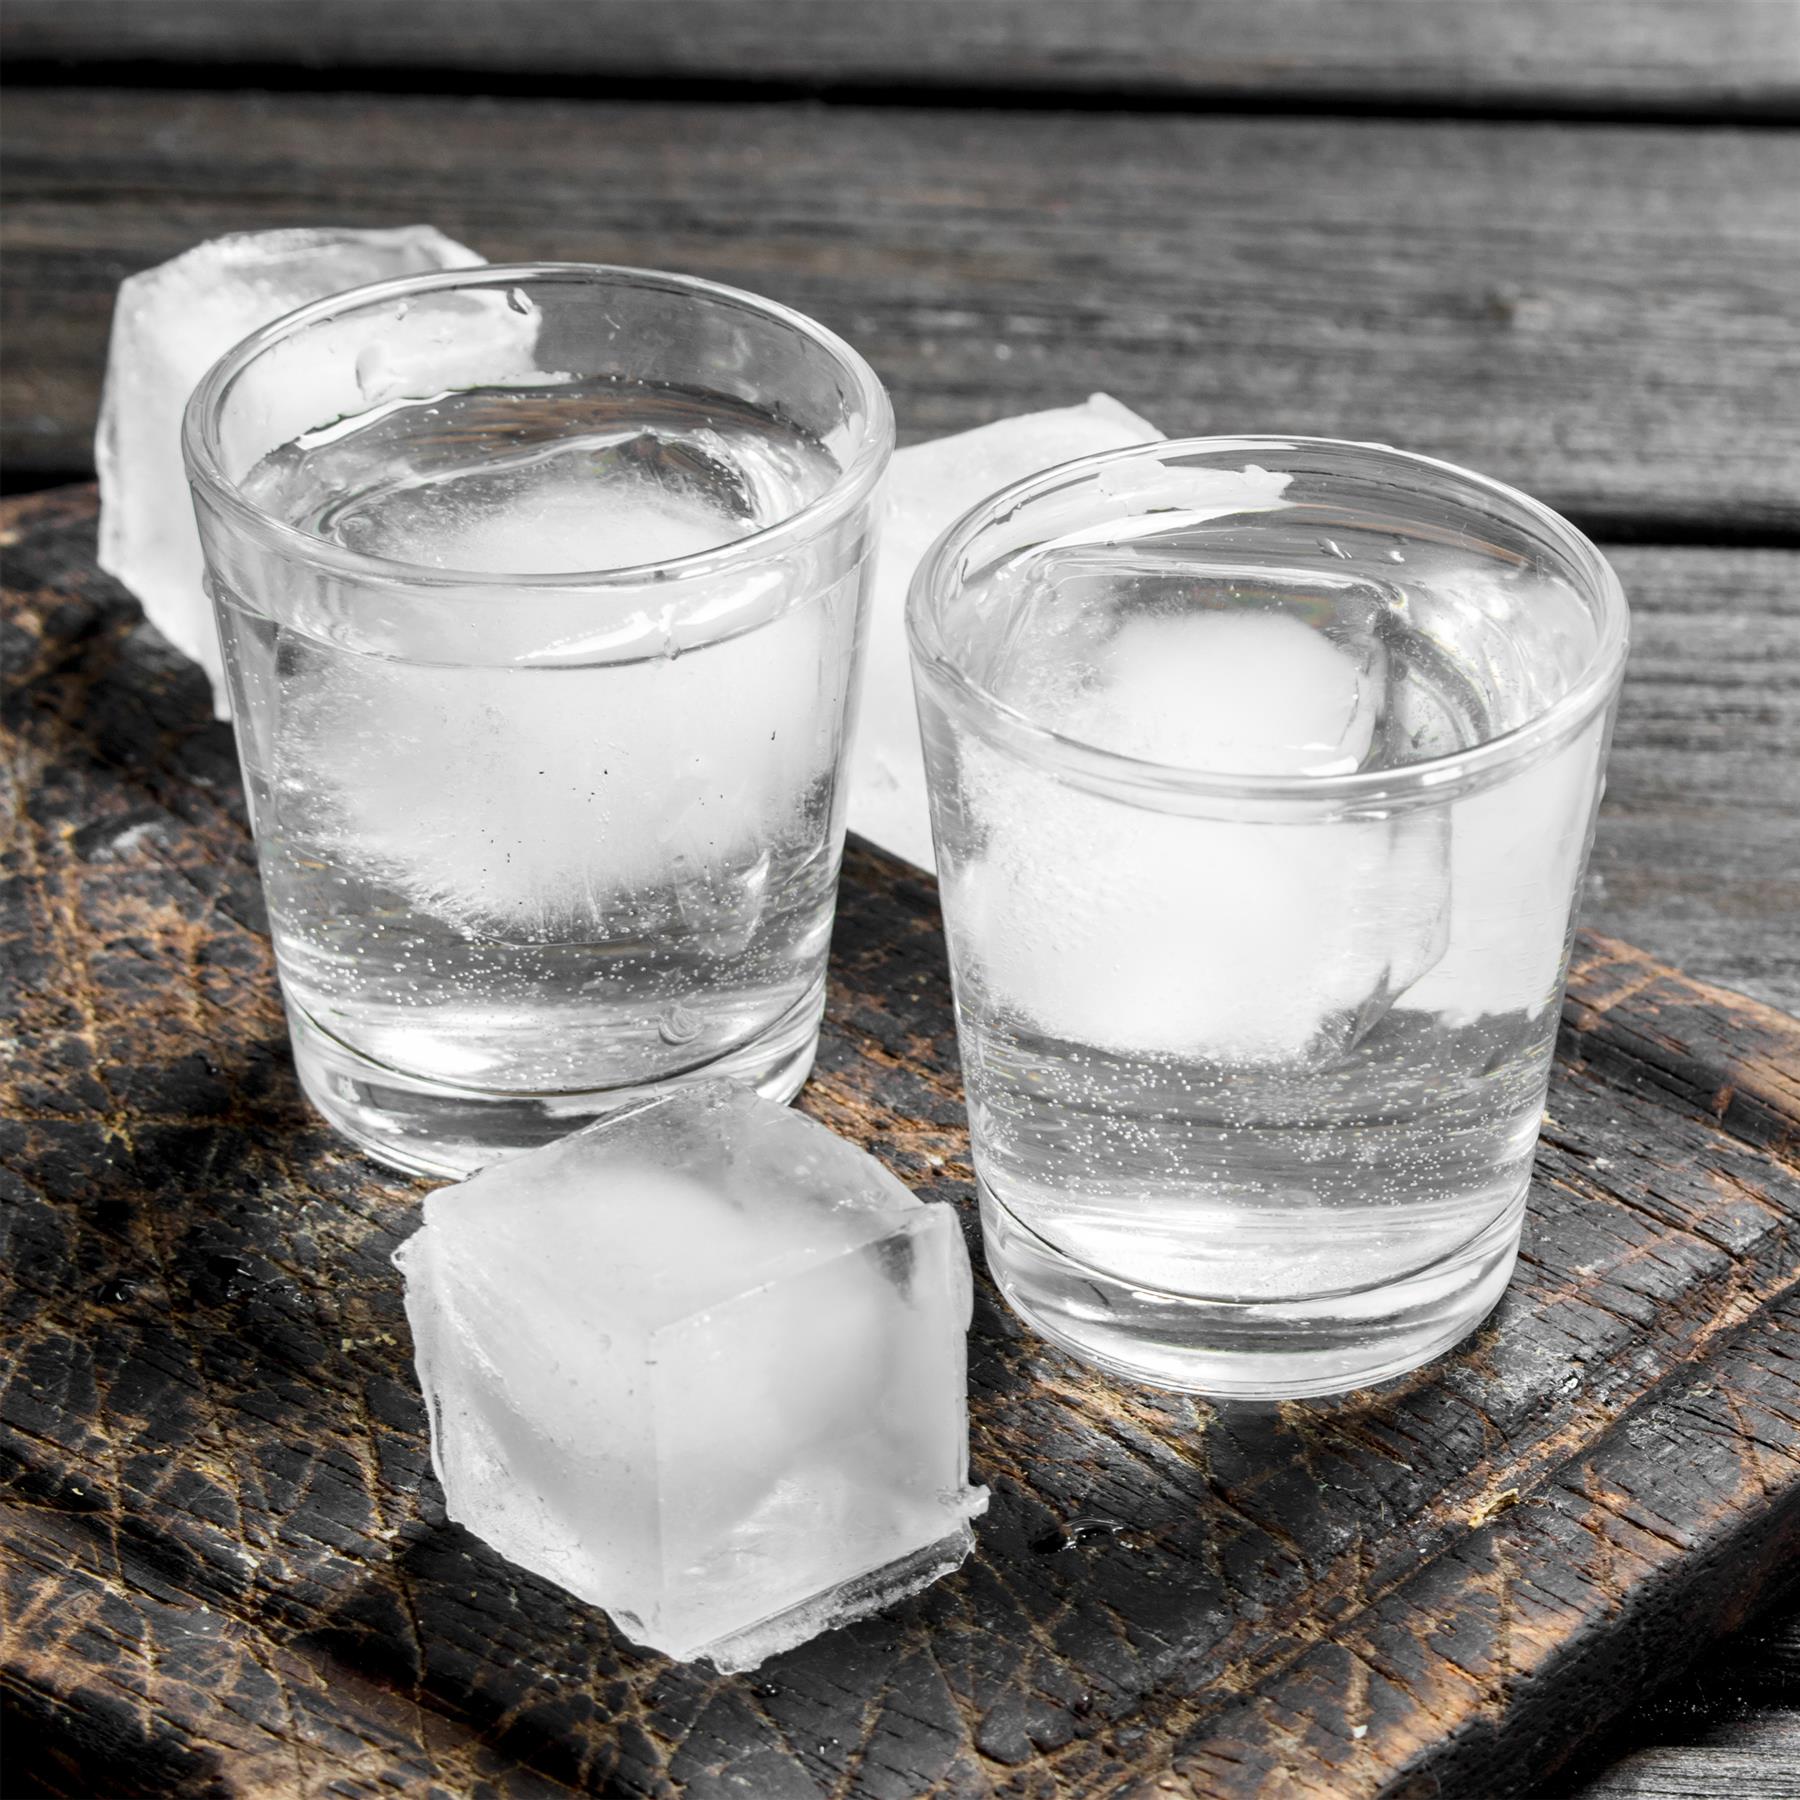 12 Pieces Shot Glass Appetizers by GEEZY - The Magic Toy Shop